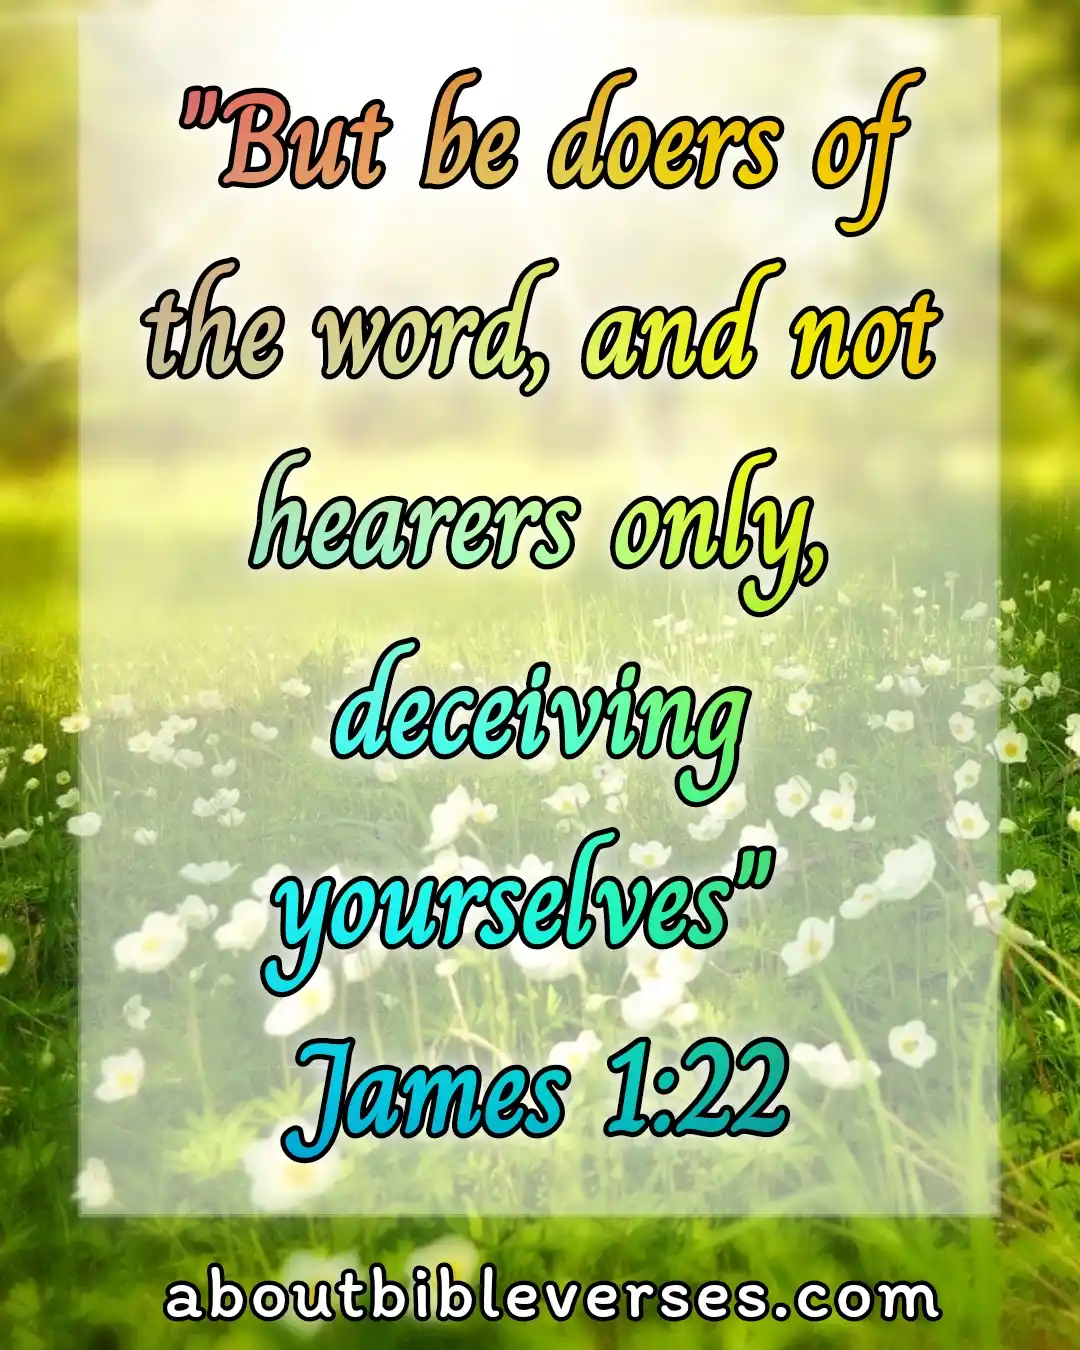 Bible Verses About Consequences Of Disobedience (James 1:22)